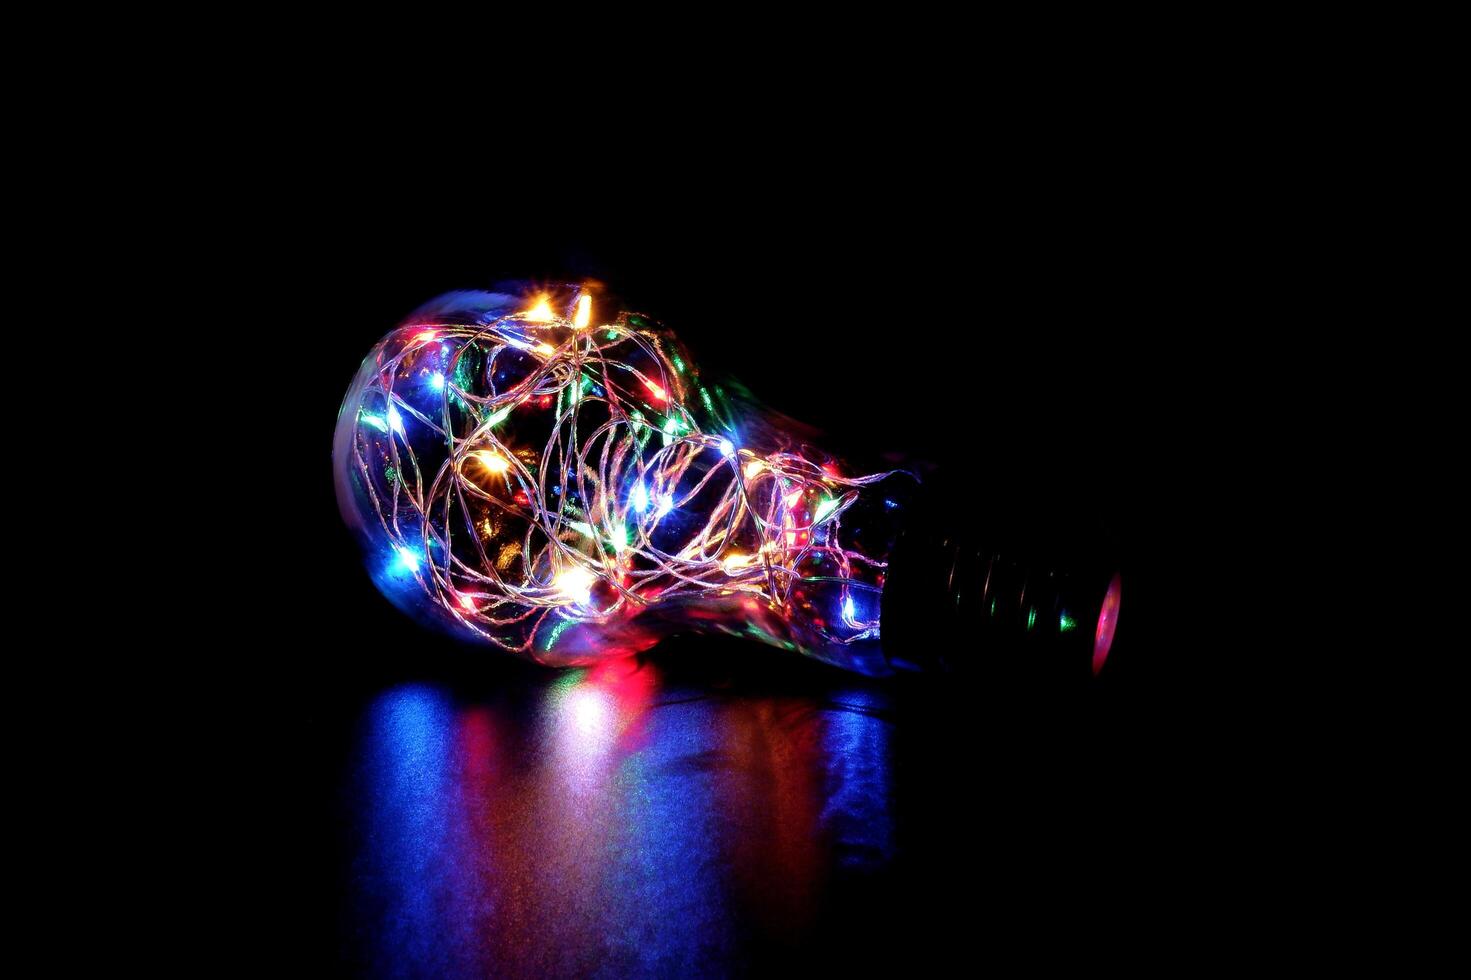 Colorful Fairy Light in a Glass Jar, in the Dark, Low-Key Photography photo